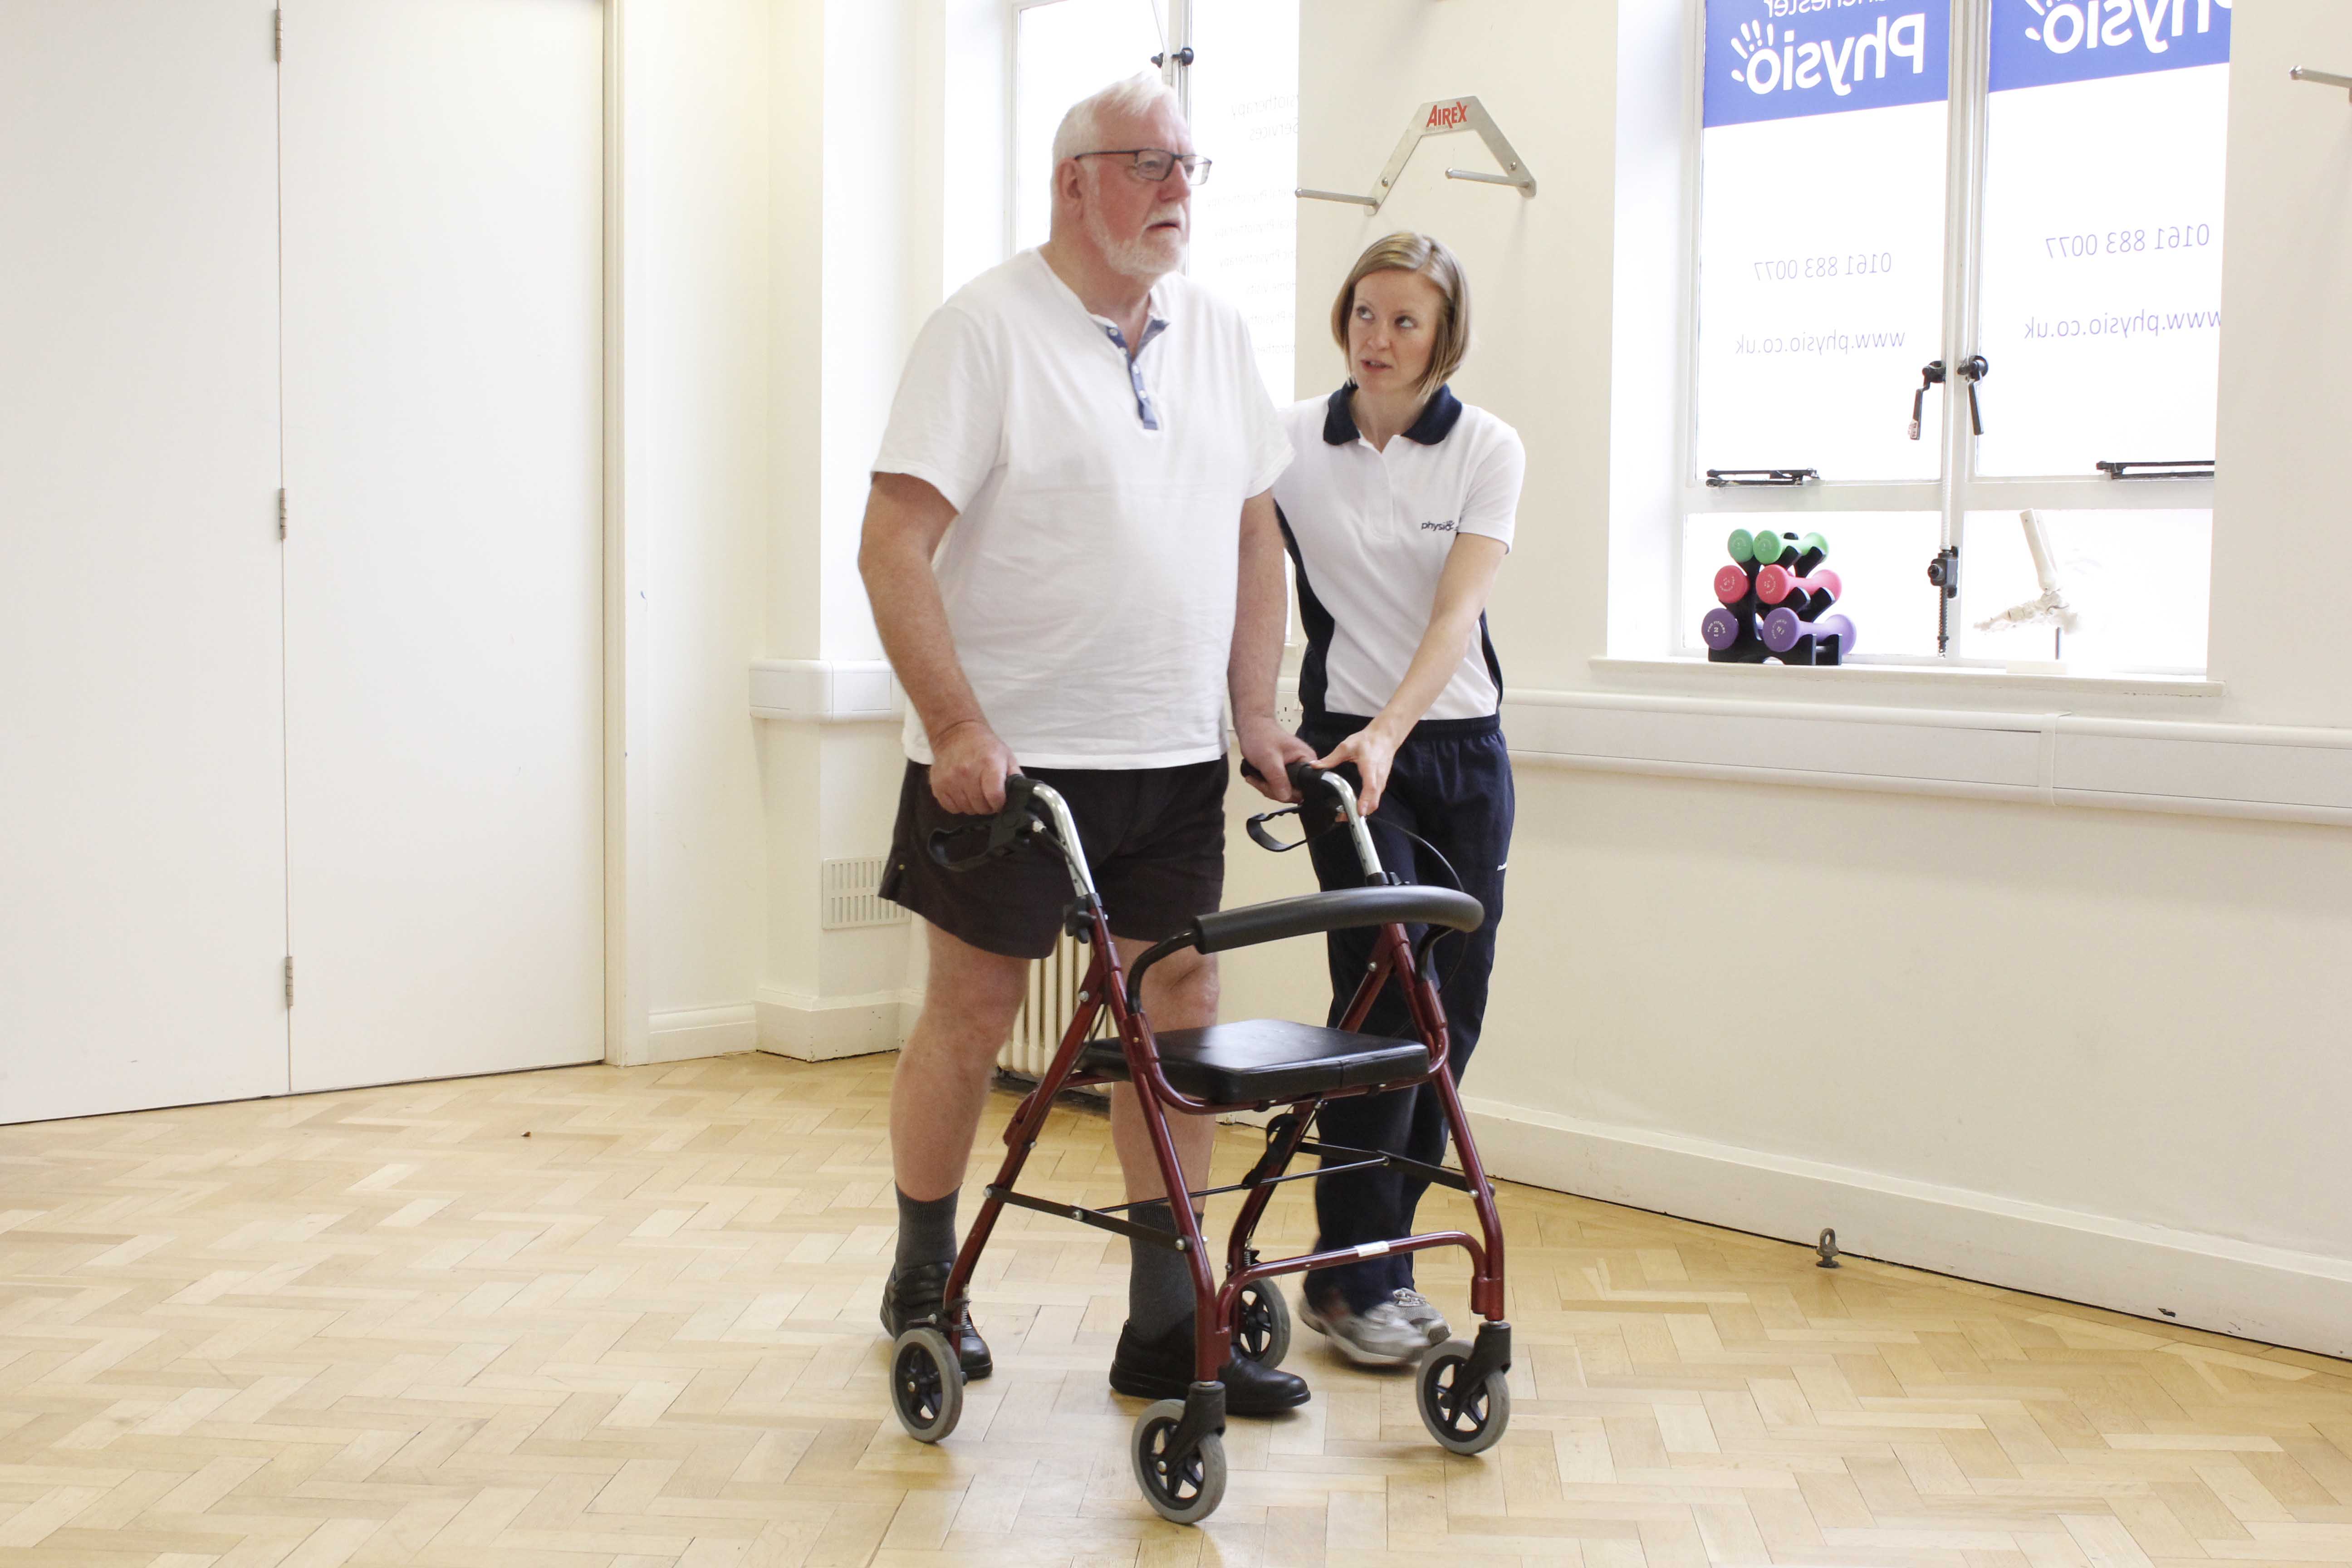 Mobility exercises using a rolator frame and close supervision of a physiotherapist